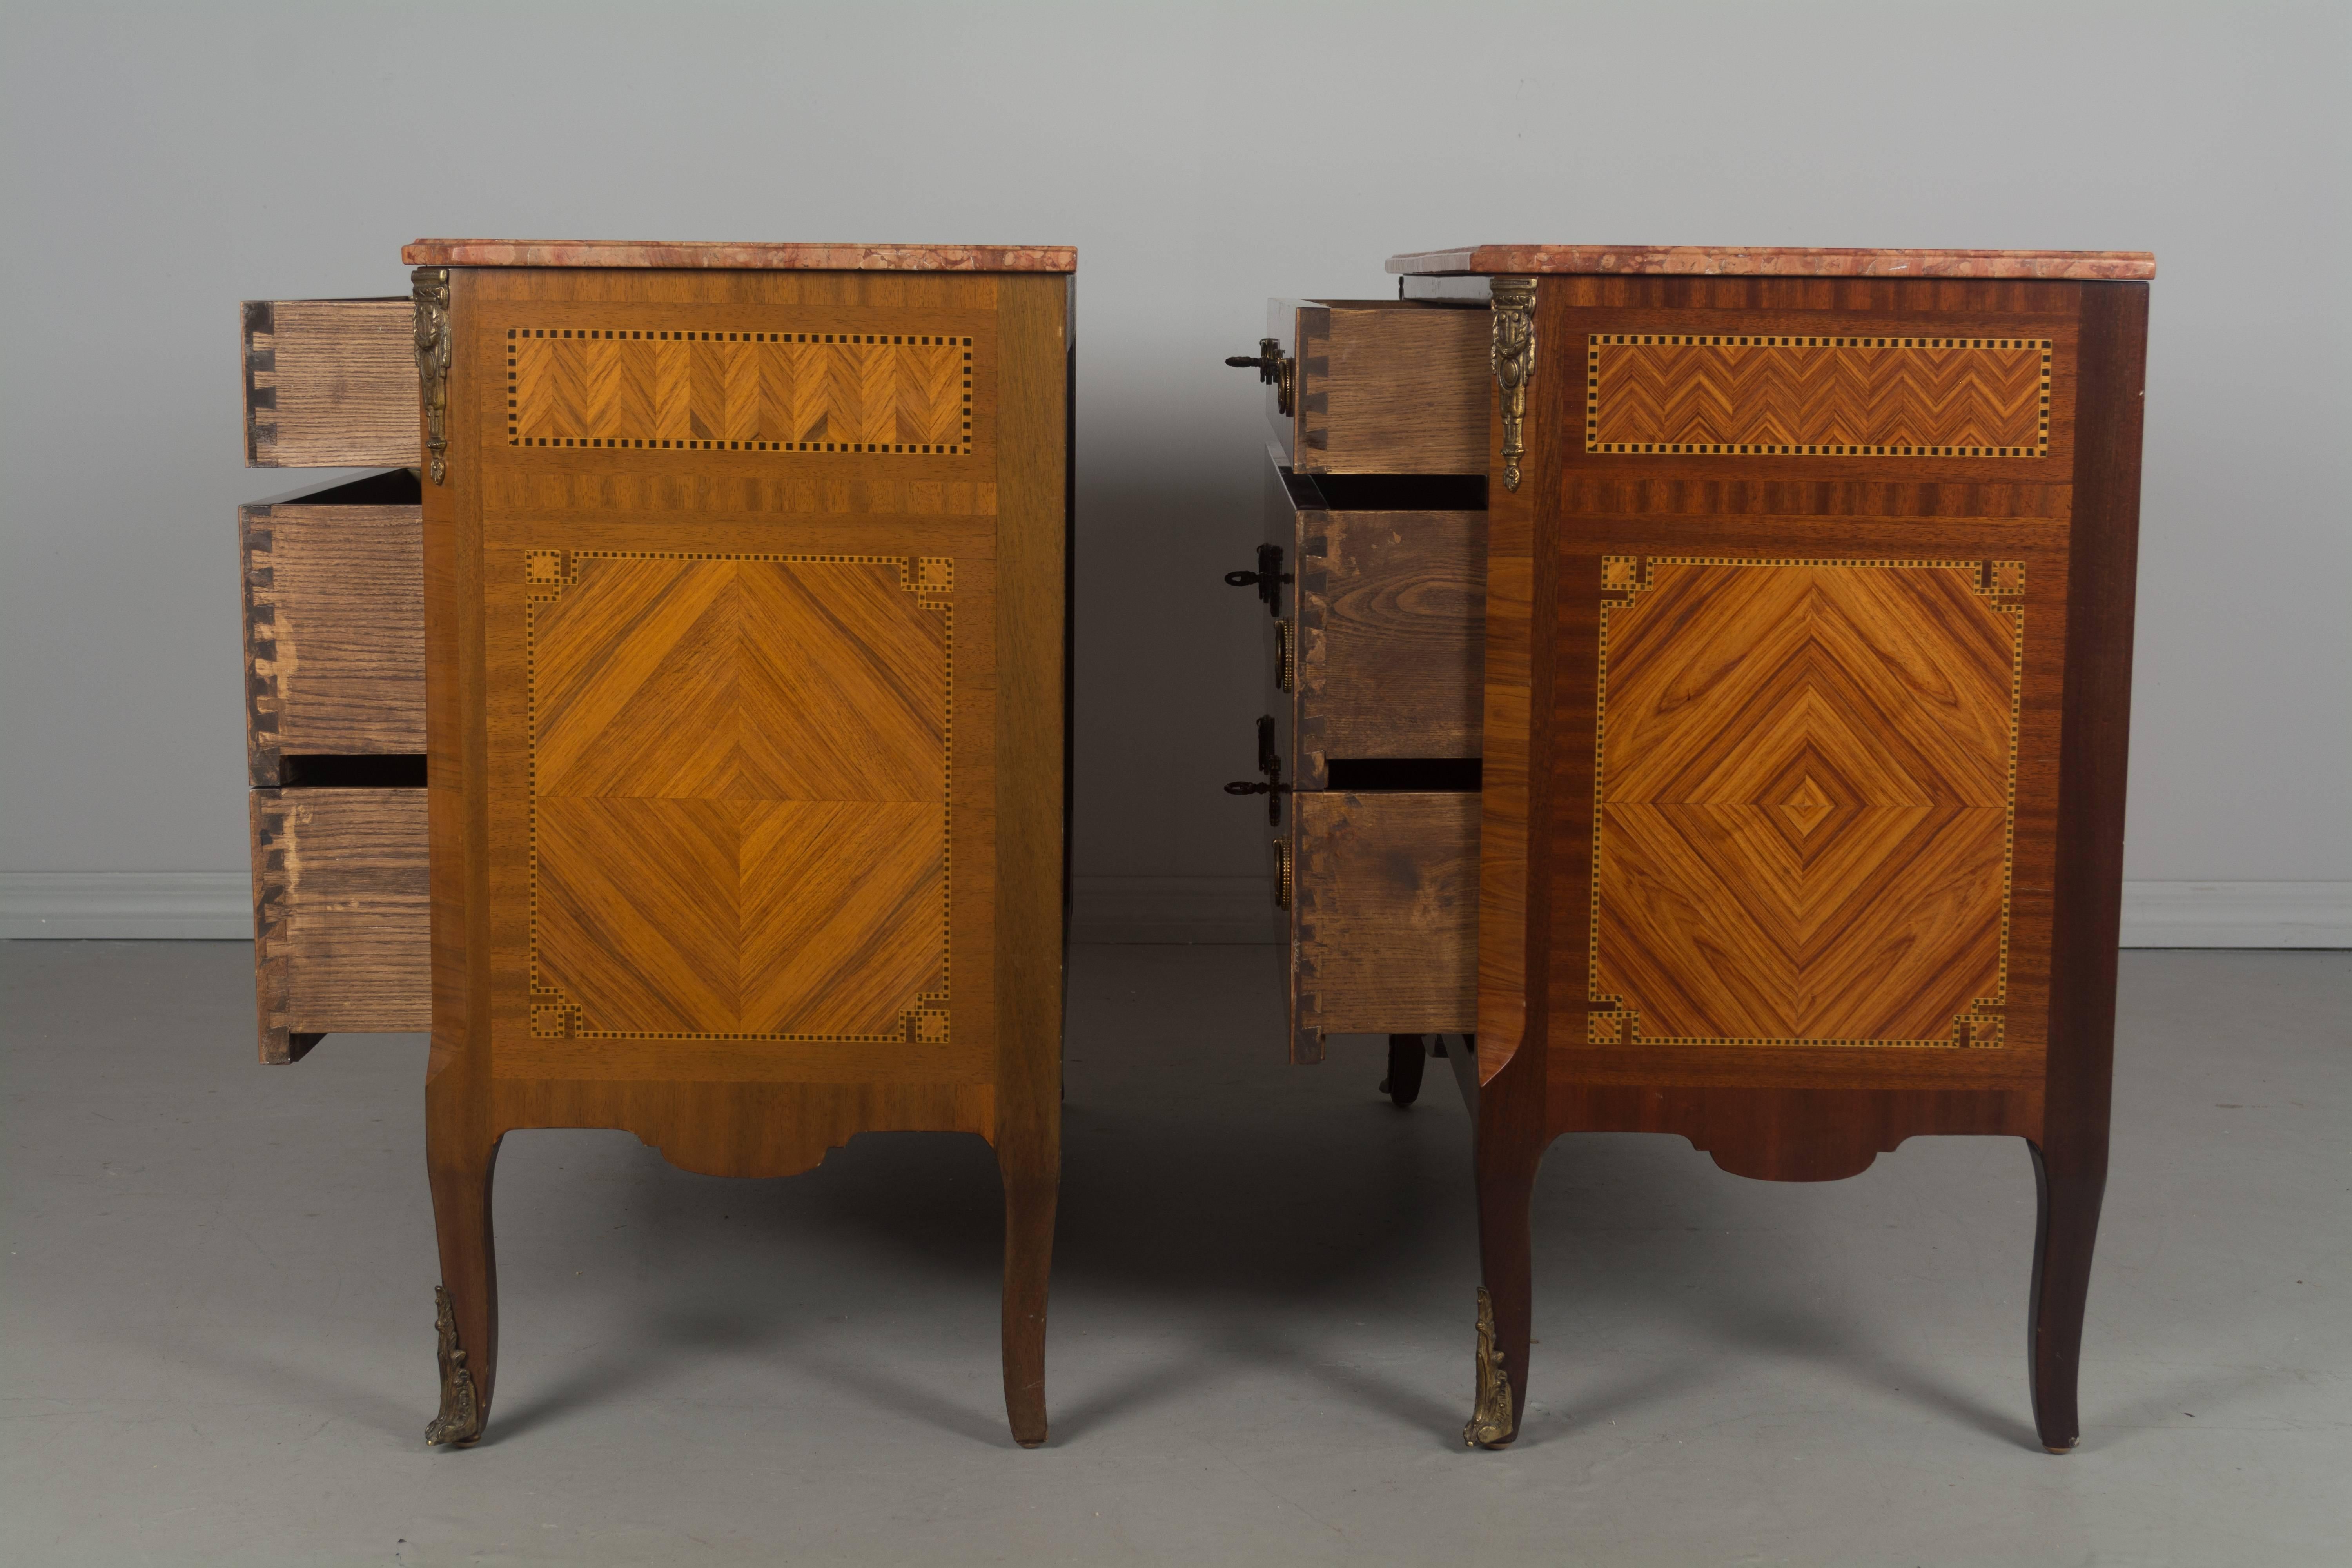 Inlay Pair of Louis XVI Style Marquetry Commodes or Chest of Drawers